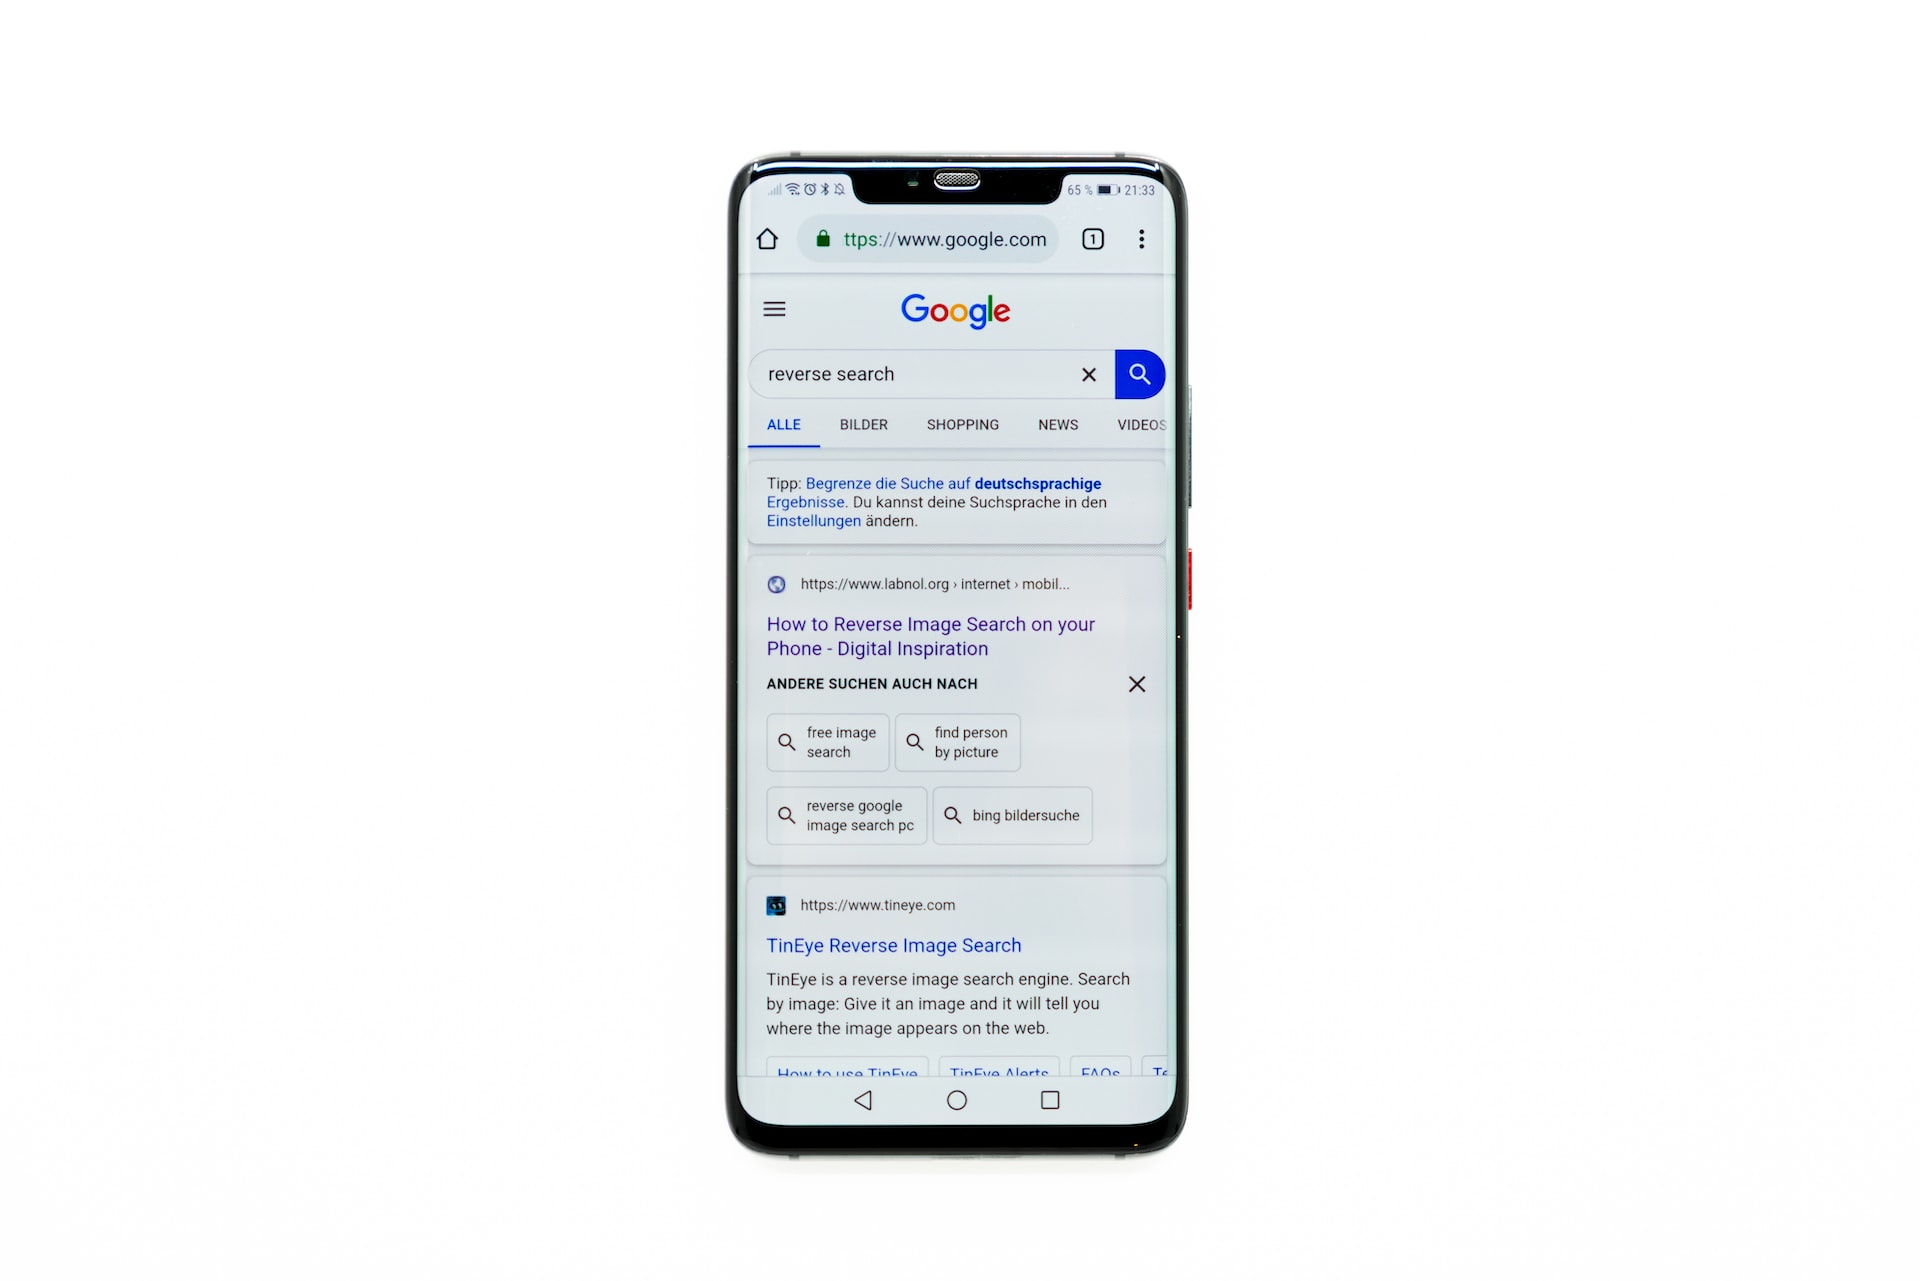 mobile google search engine results page